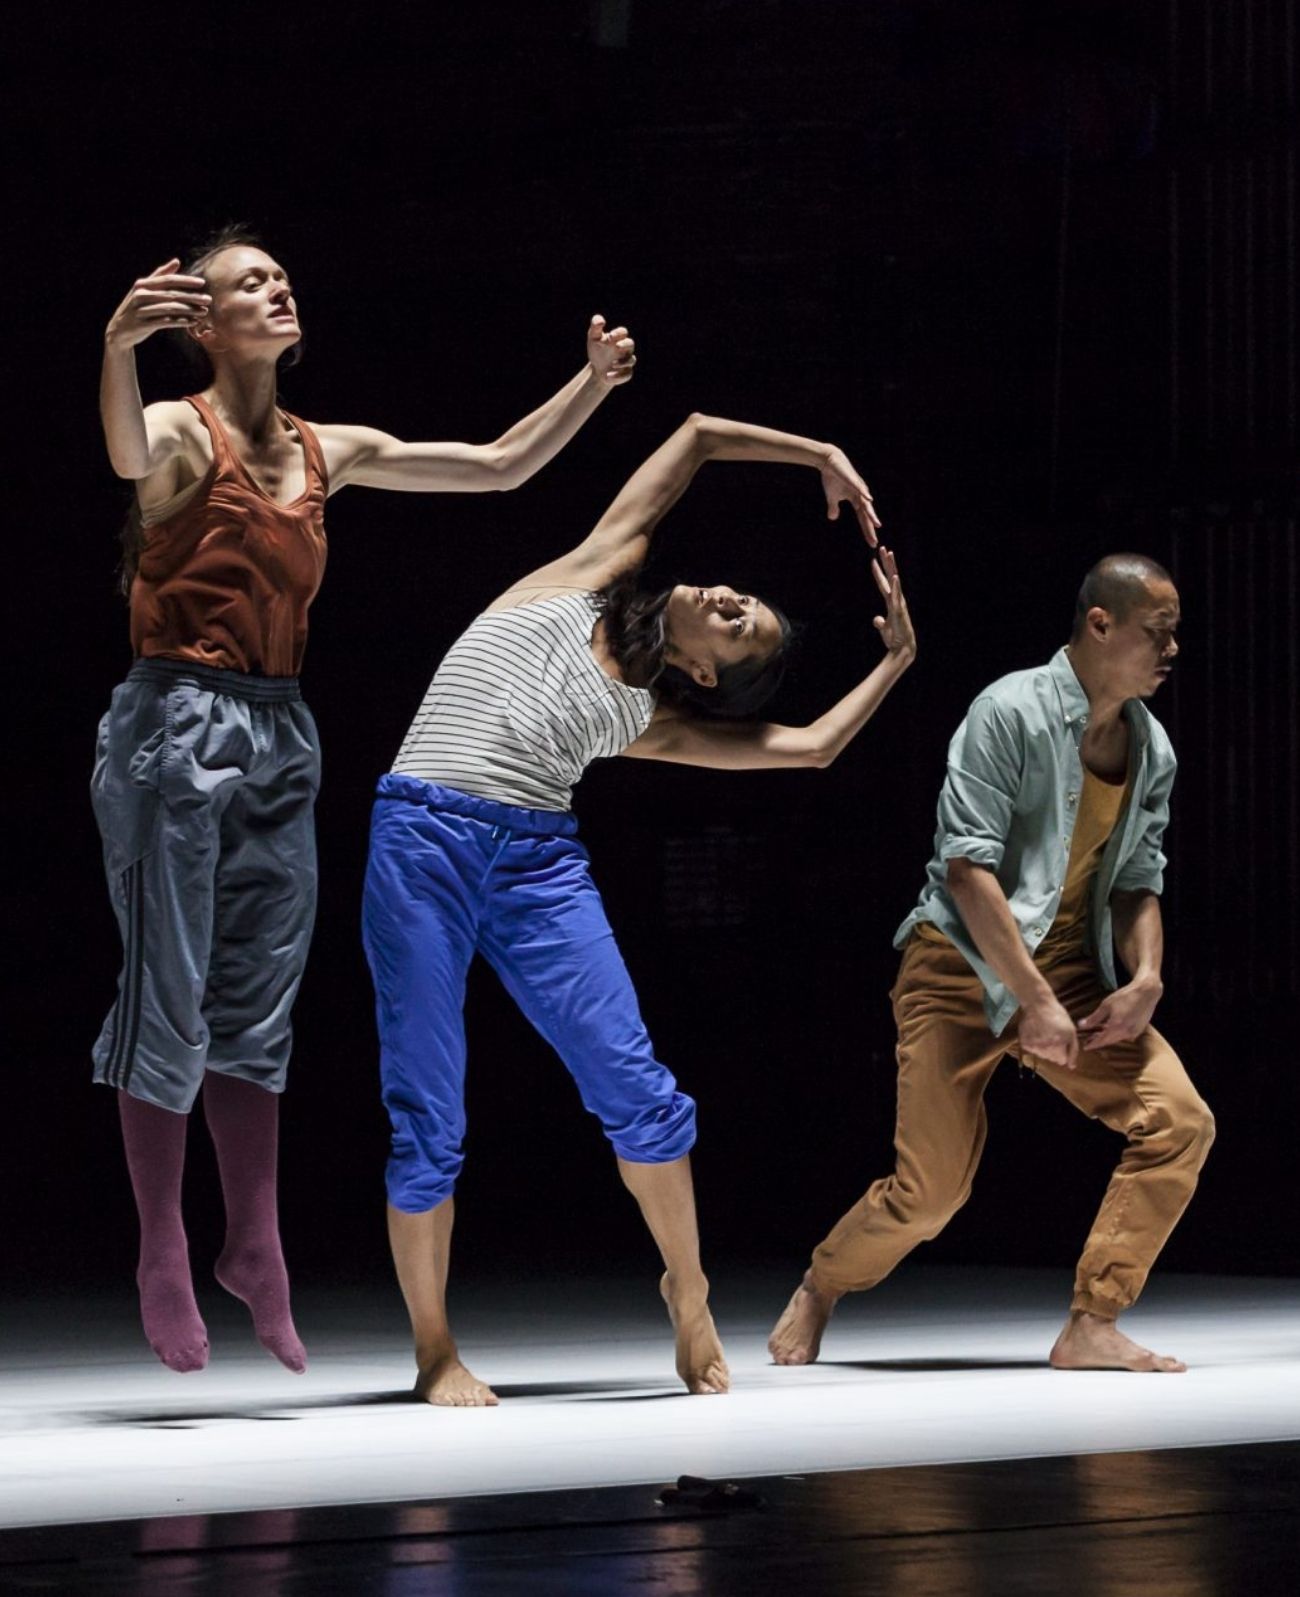 Three performers stand in a line each forming different shapes with arms outstretched